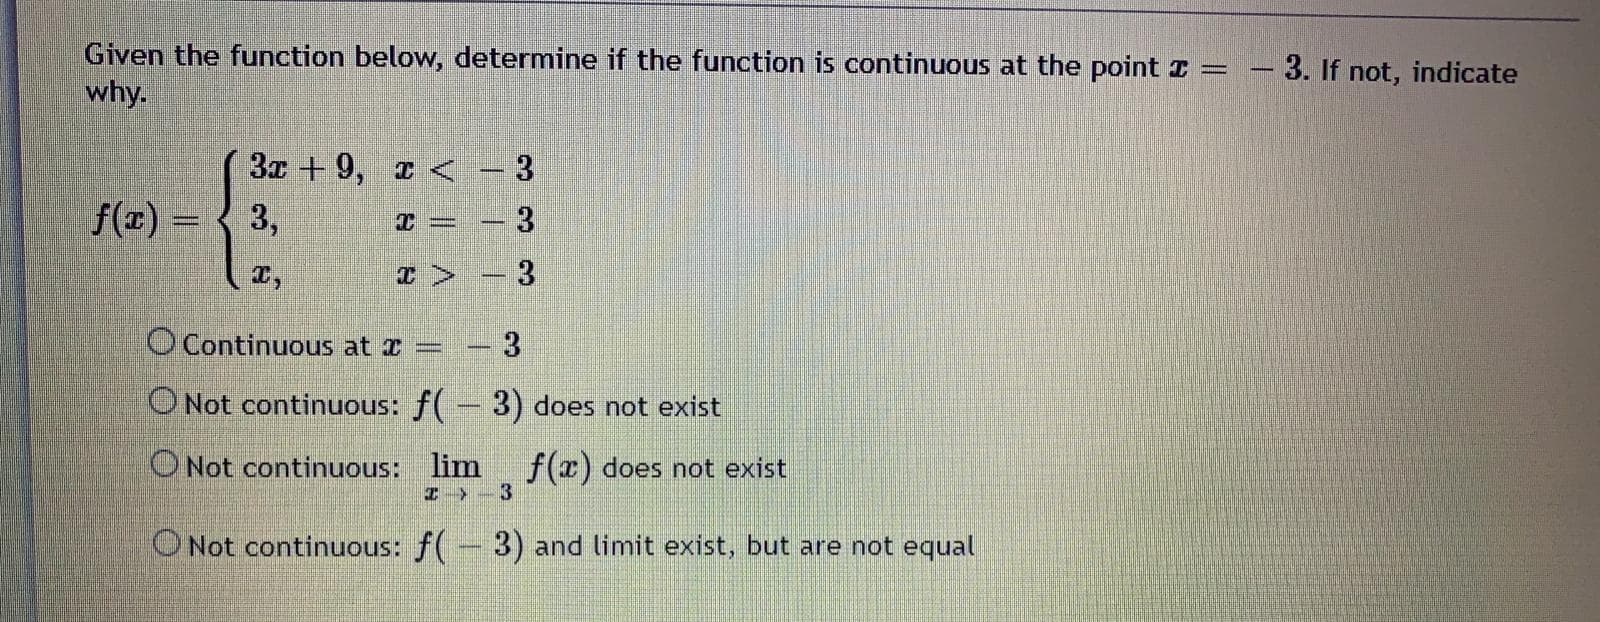 Given the function below, determine if the function is continuous at the point =
why.
3. If not, indicate
3x + 9, < – 3
f(z) =
3,
O Continuous at I
3.
ONot continuous: f( - 3) does not exist
ONot continuous: lim
I -3
f(r) does not exist
ONot continuous: f(-3) and limit exist, but are not equal
